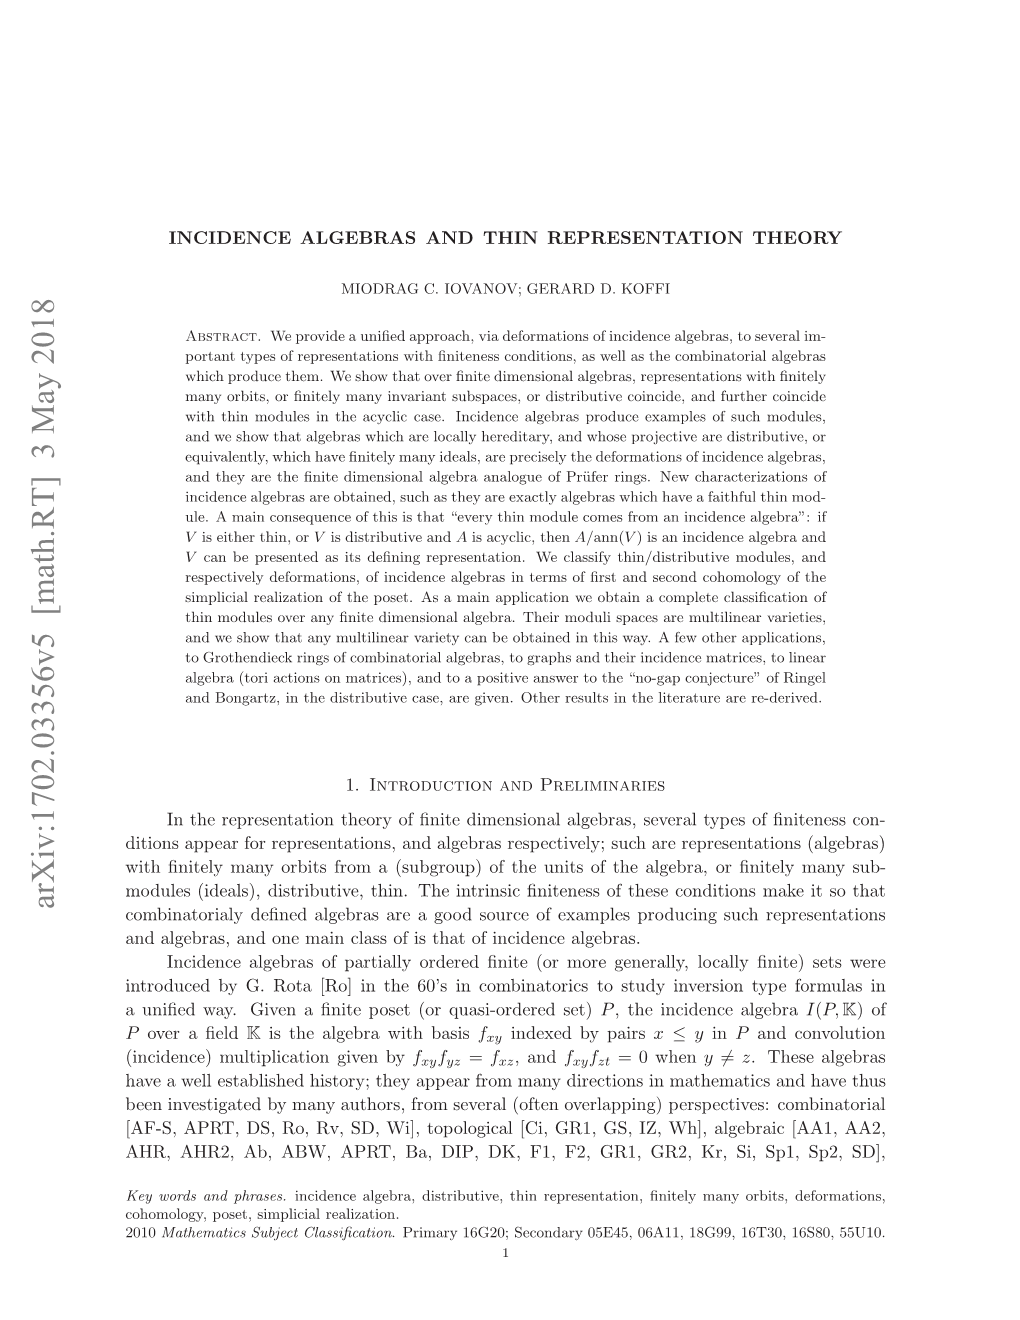 On Incidence Algebras and Their Representations